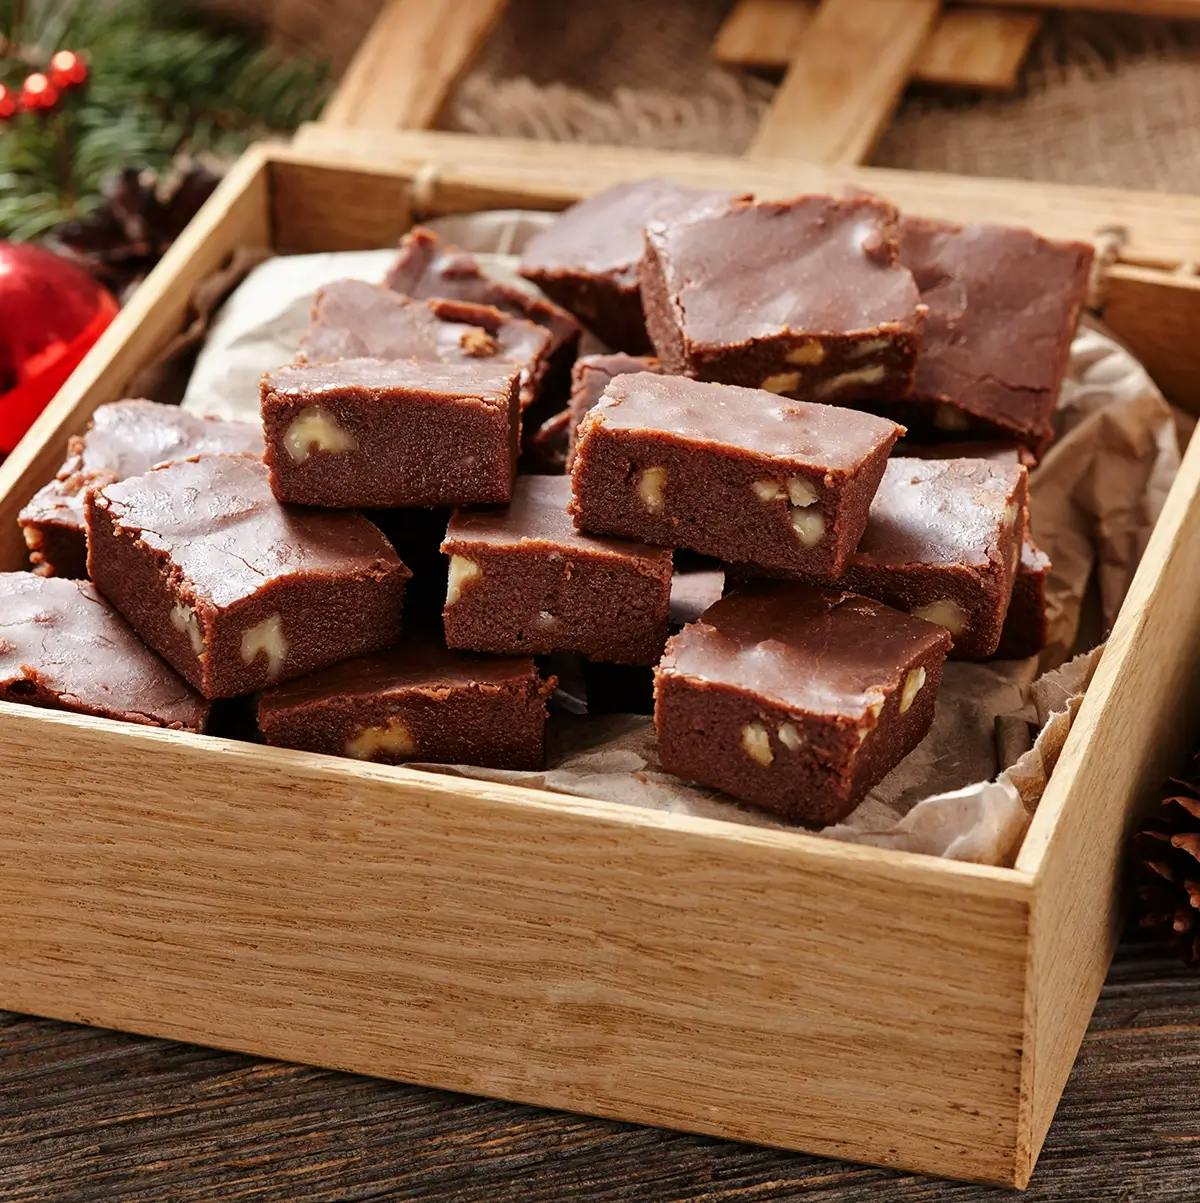 Chocolate microwave fudge with nuts in a box surrounded by Christmas ornaments and pinecones.